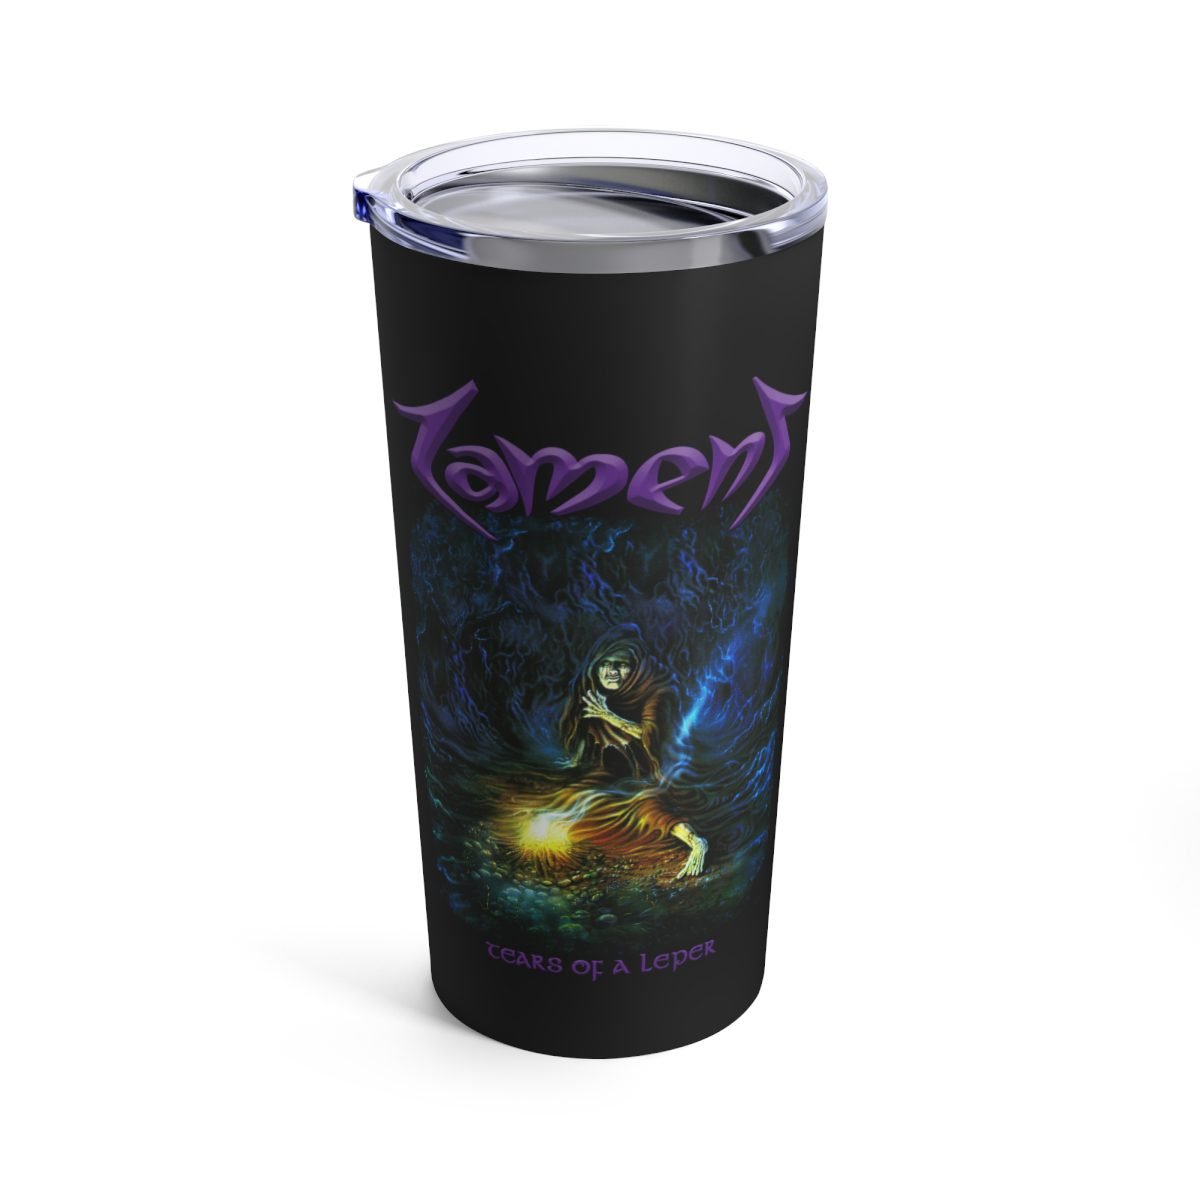 Lament – Tears of a Leper 20oz Stainless Steel Tumbler